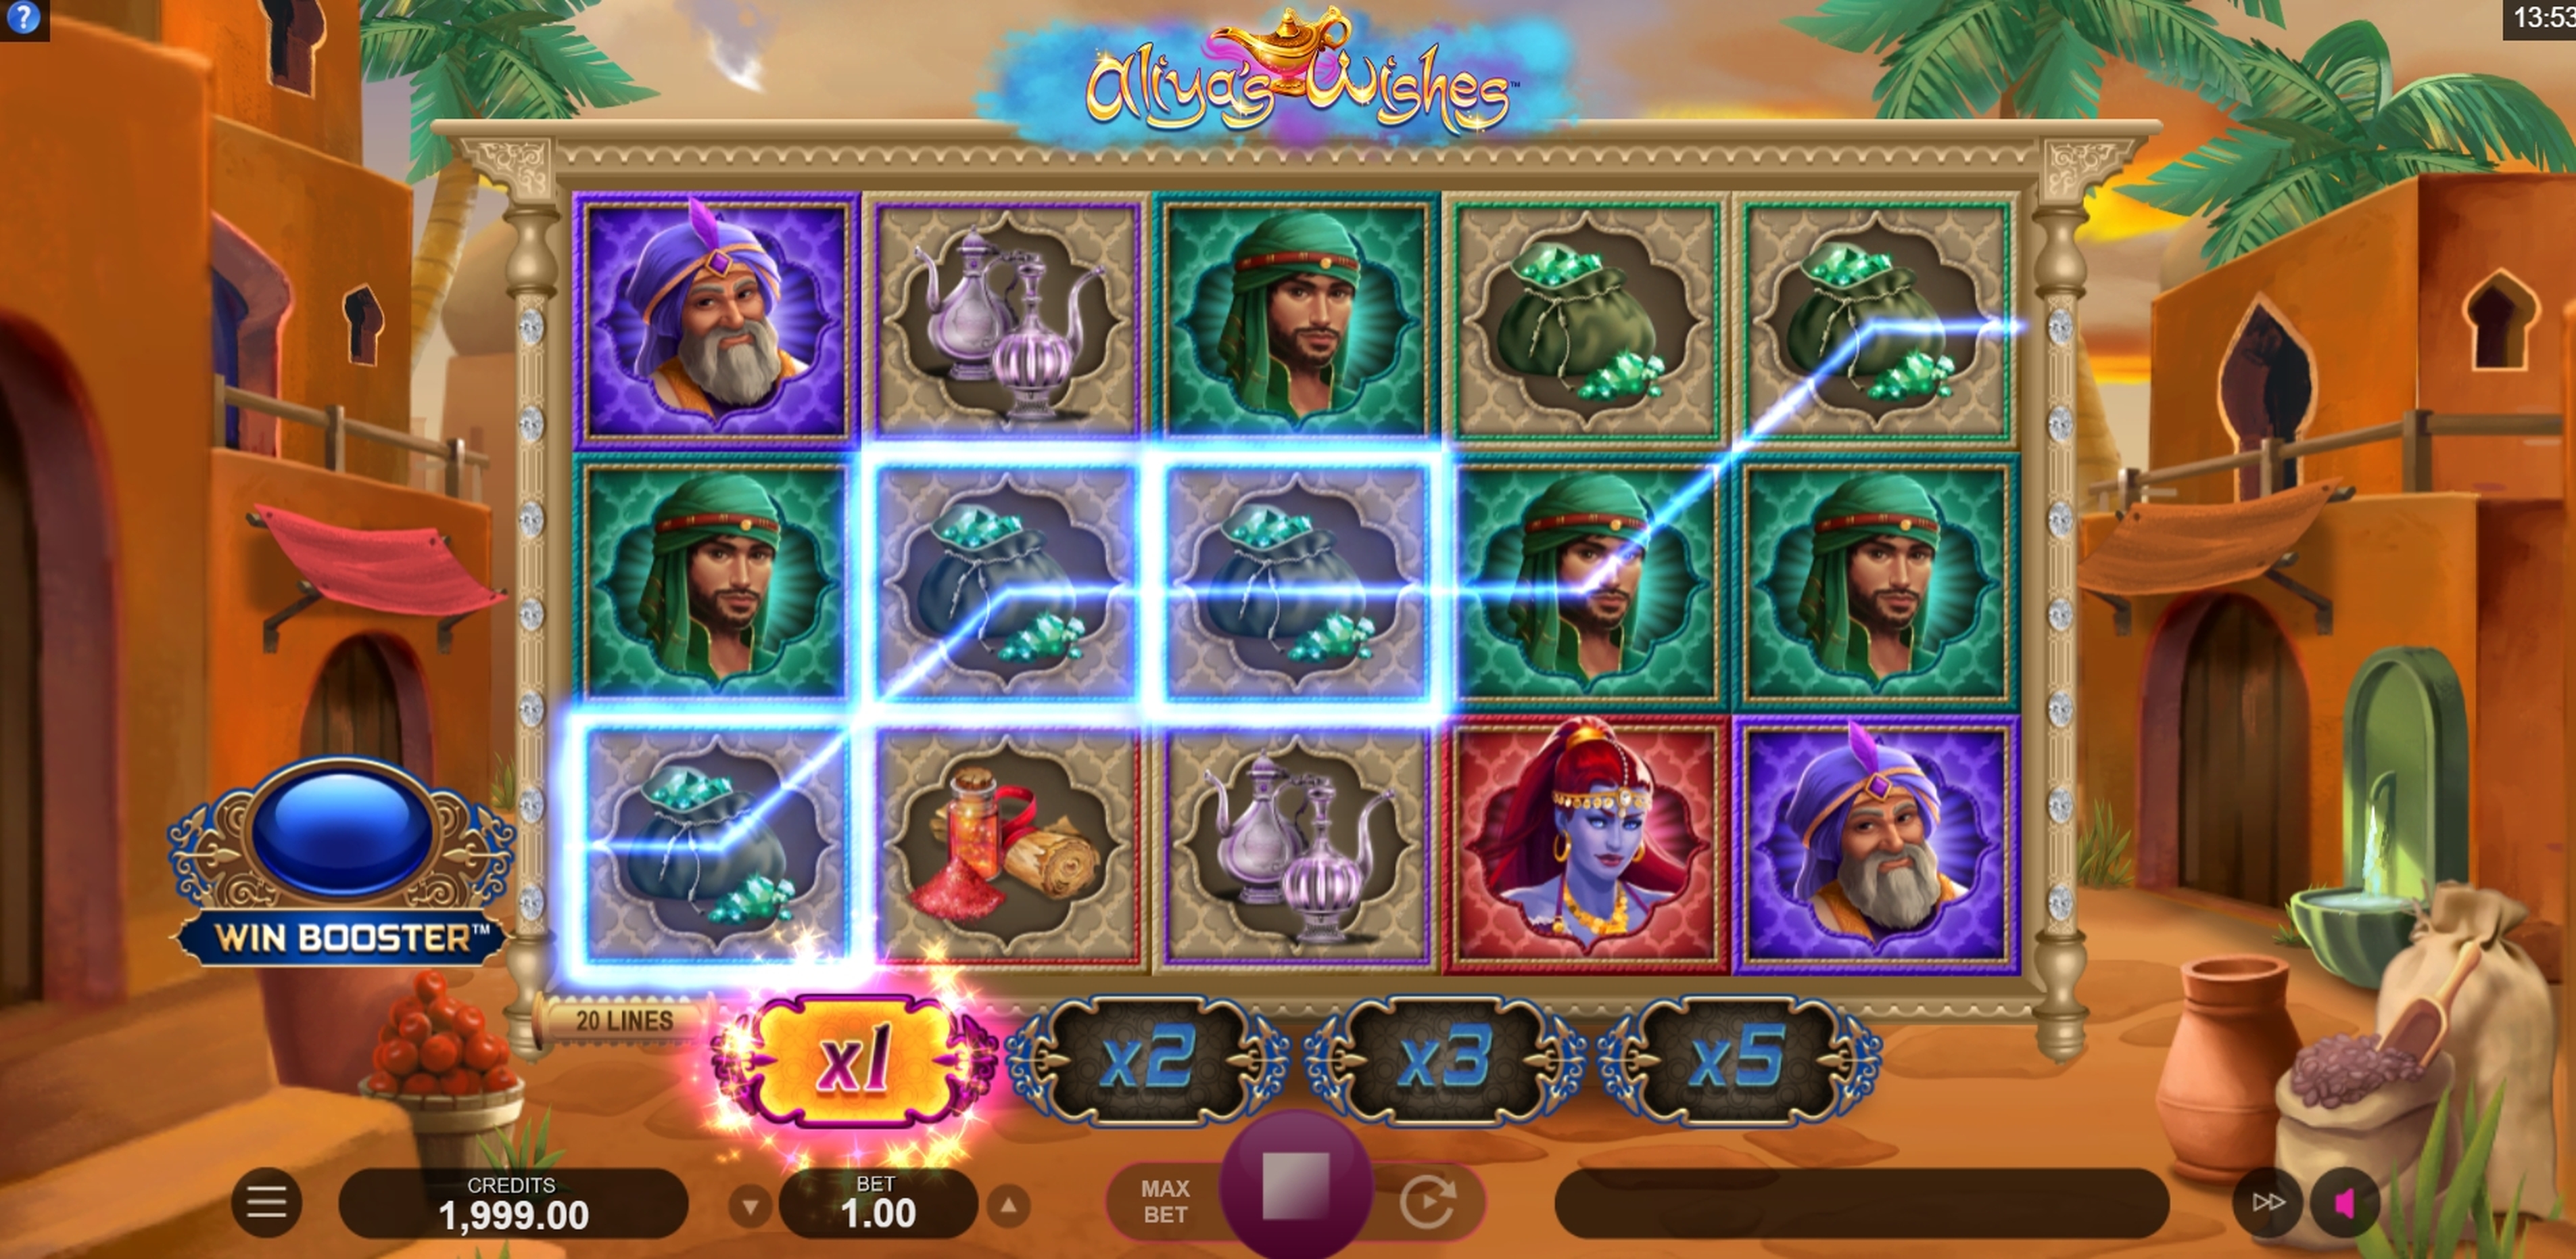 Win Money in Aliyas Wishes Free Slot Game by Fortune Factory Studios